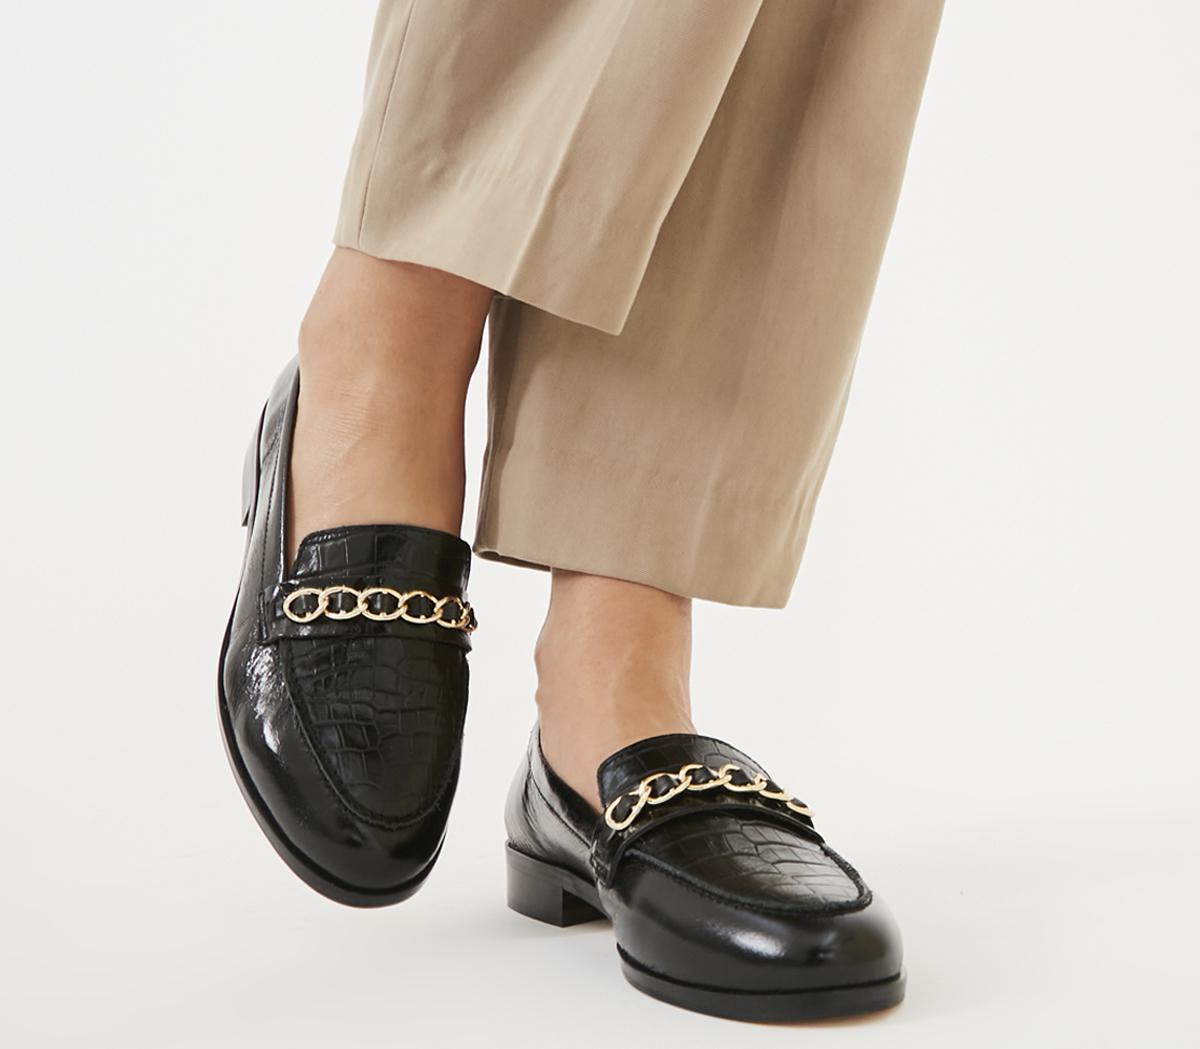 OFFICEFulfill Chain LoafersBlack Leather